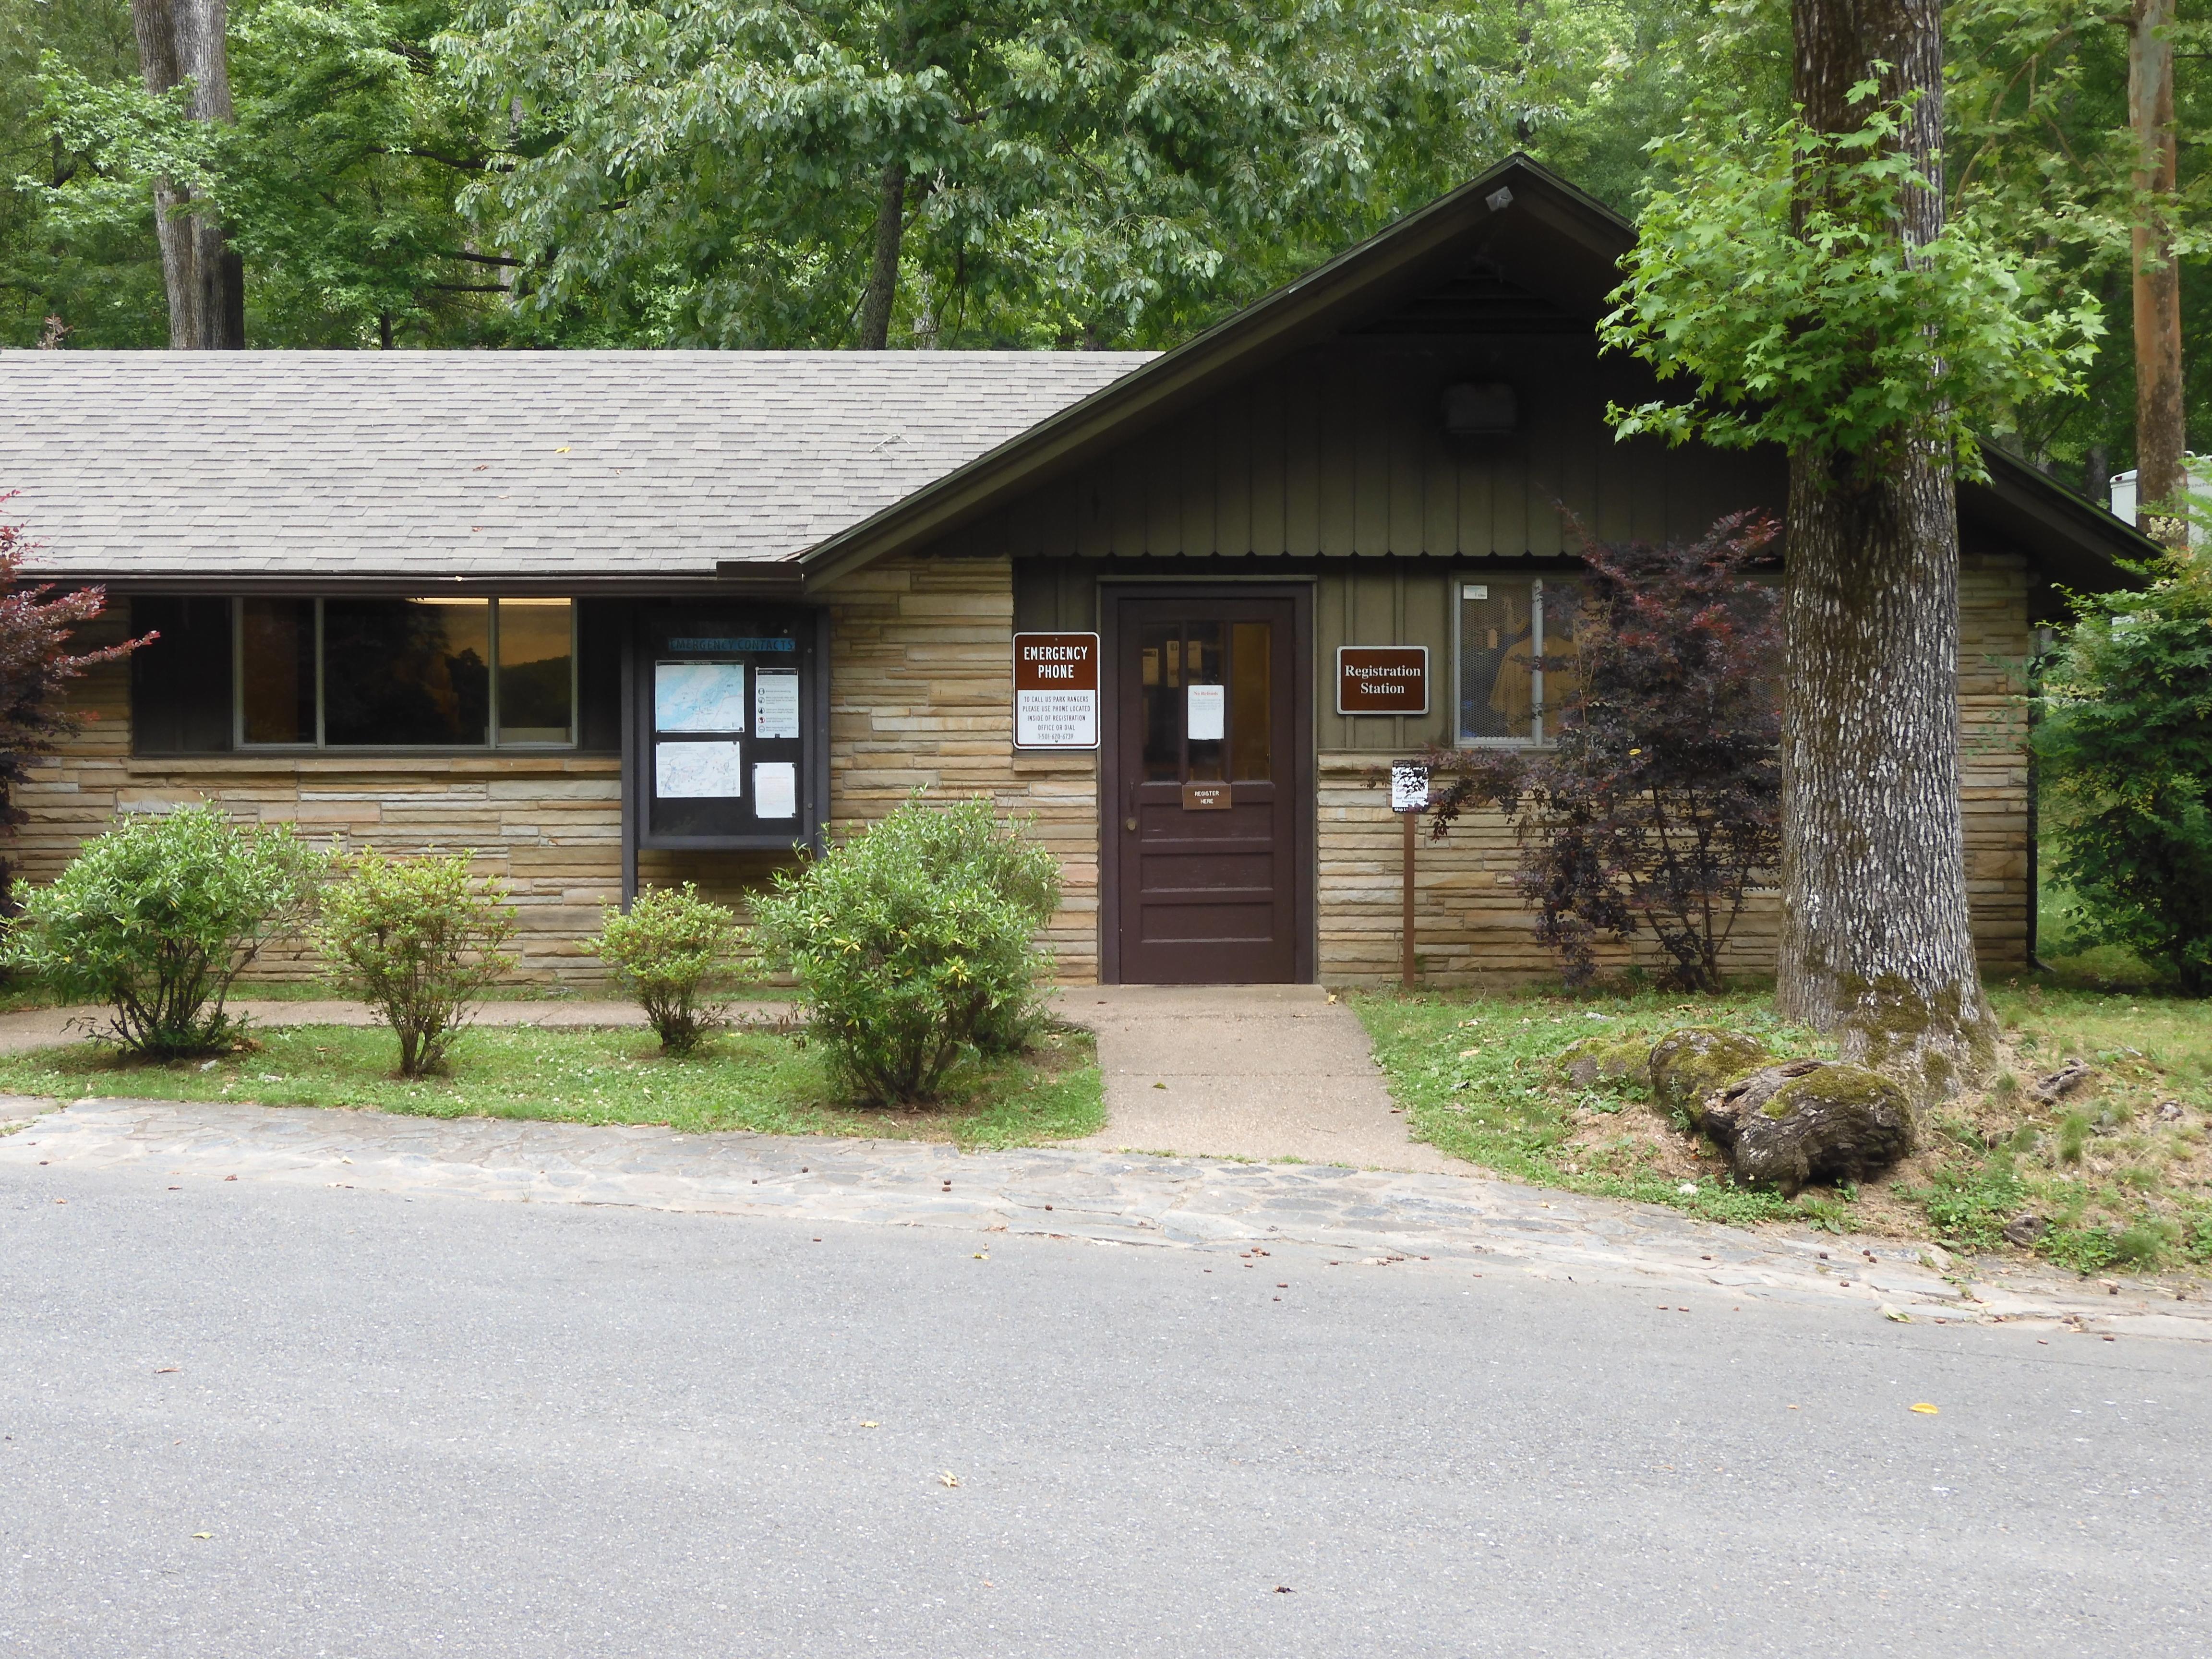 The tan brick, ranch style building houses the campground's fee station and community bulletin board